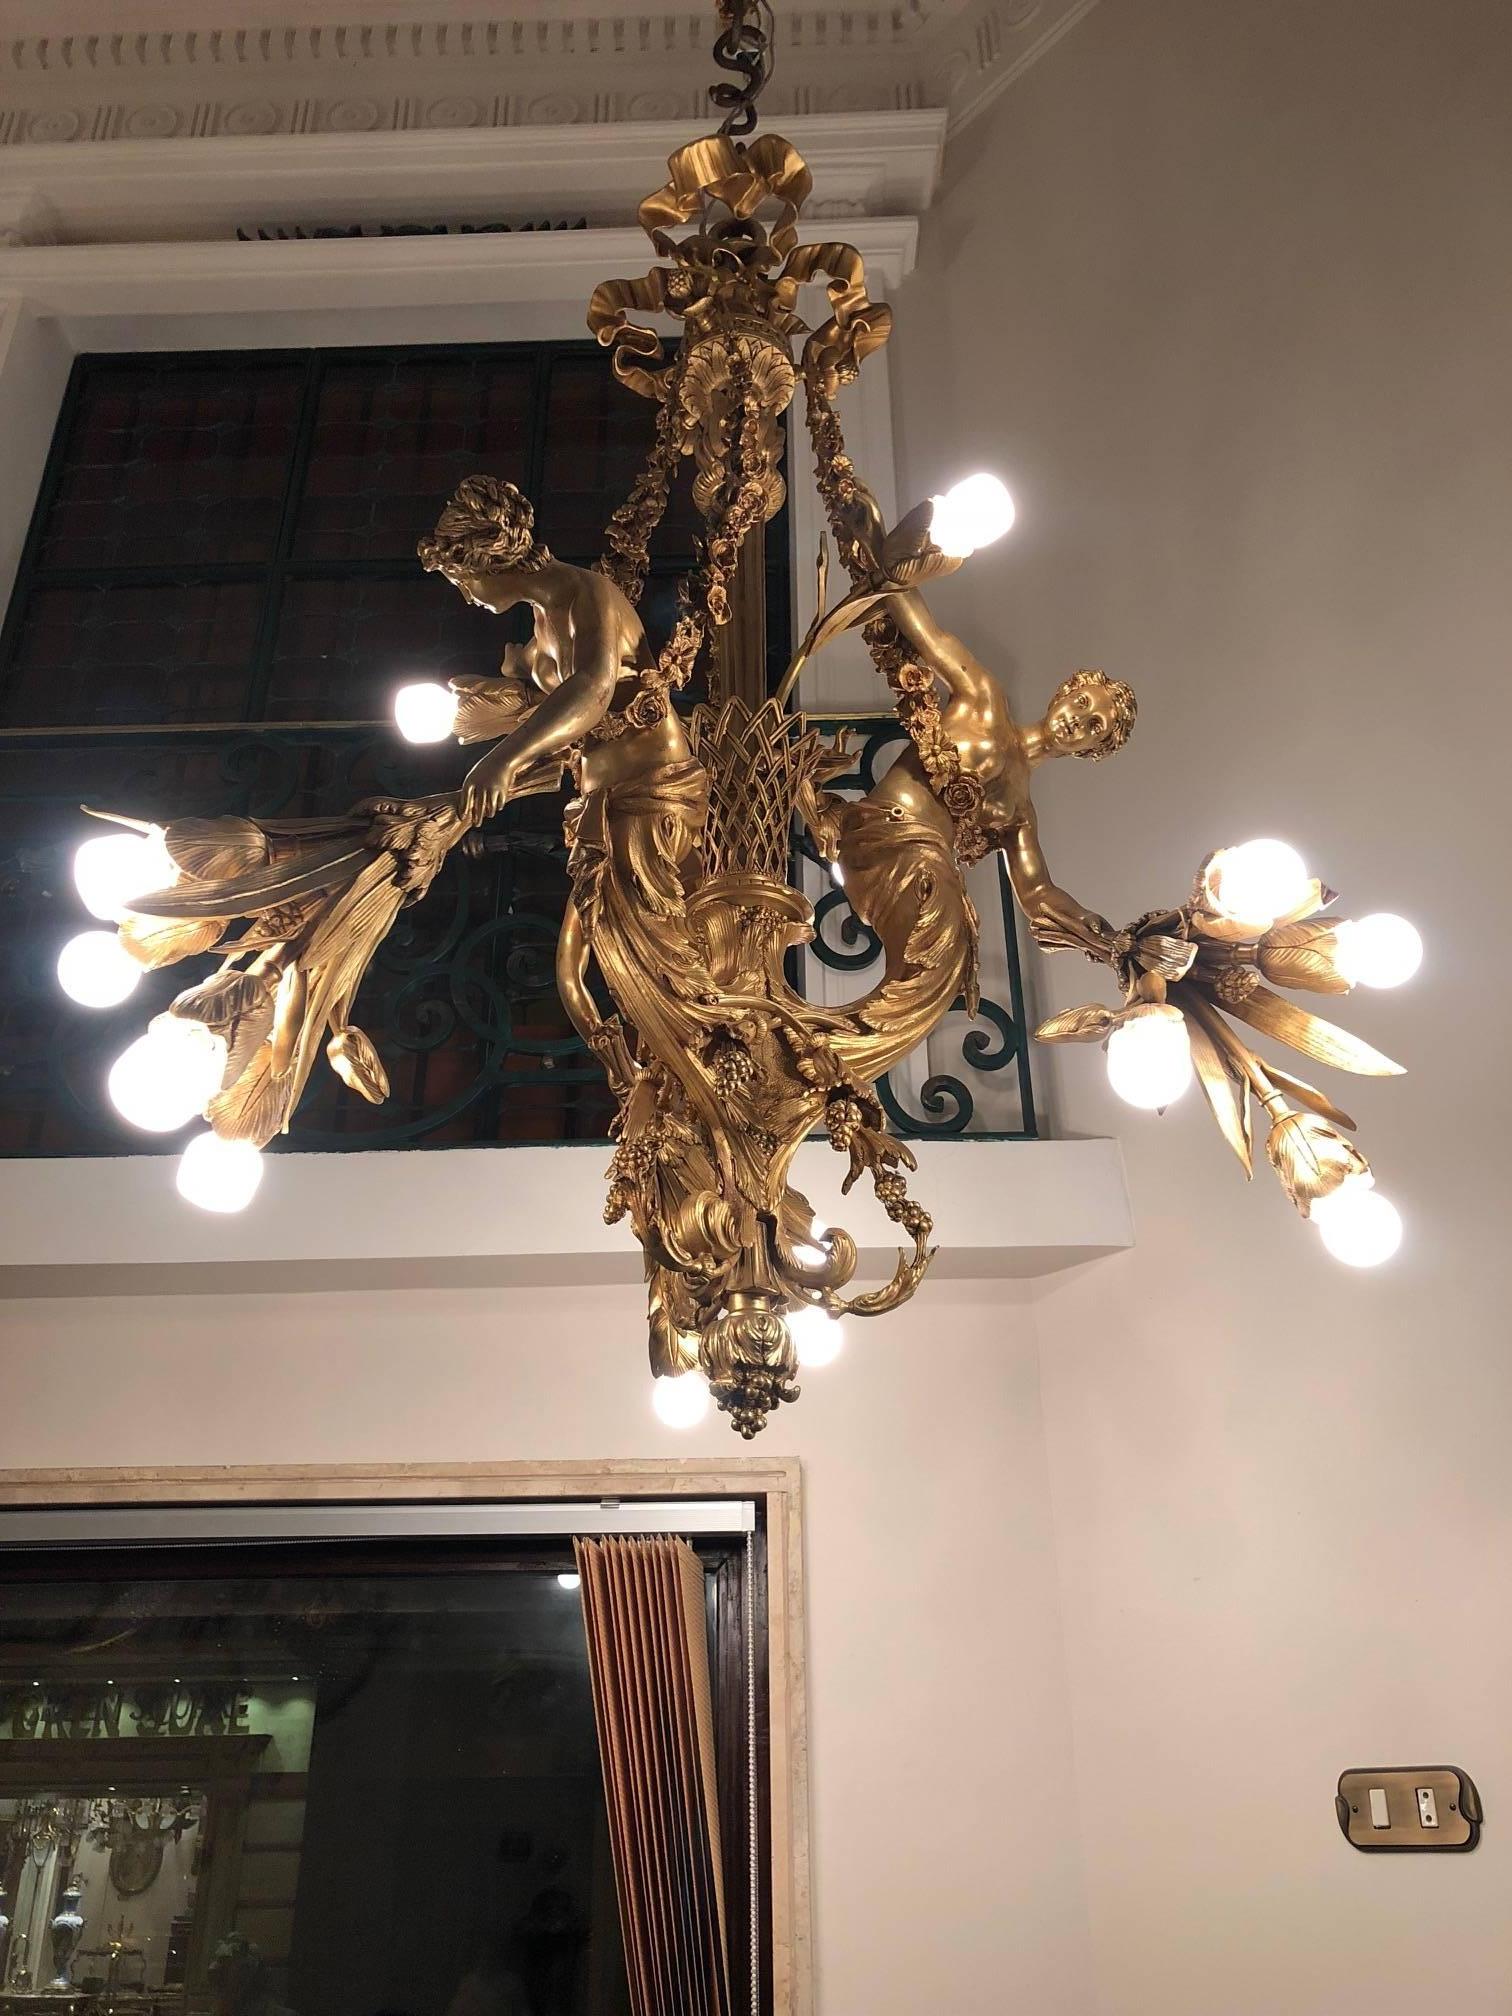 Finely chased and gilded bronze. Extremely rare and decorative chandelier made of solid bronze fire-gilded. Body flanked by three ladies holding a bunch of flowers in the form of candlesticks. Completely electrified.

Measures: Height circa 43.30